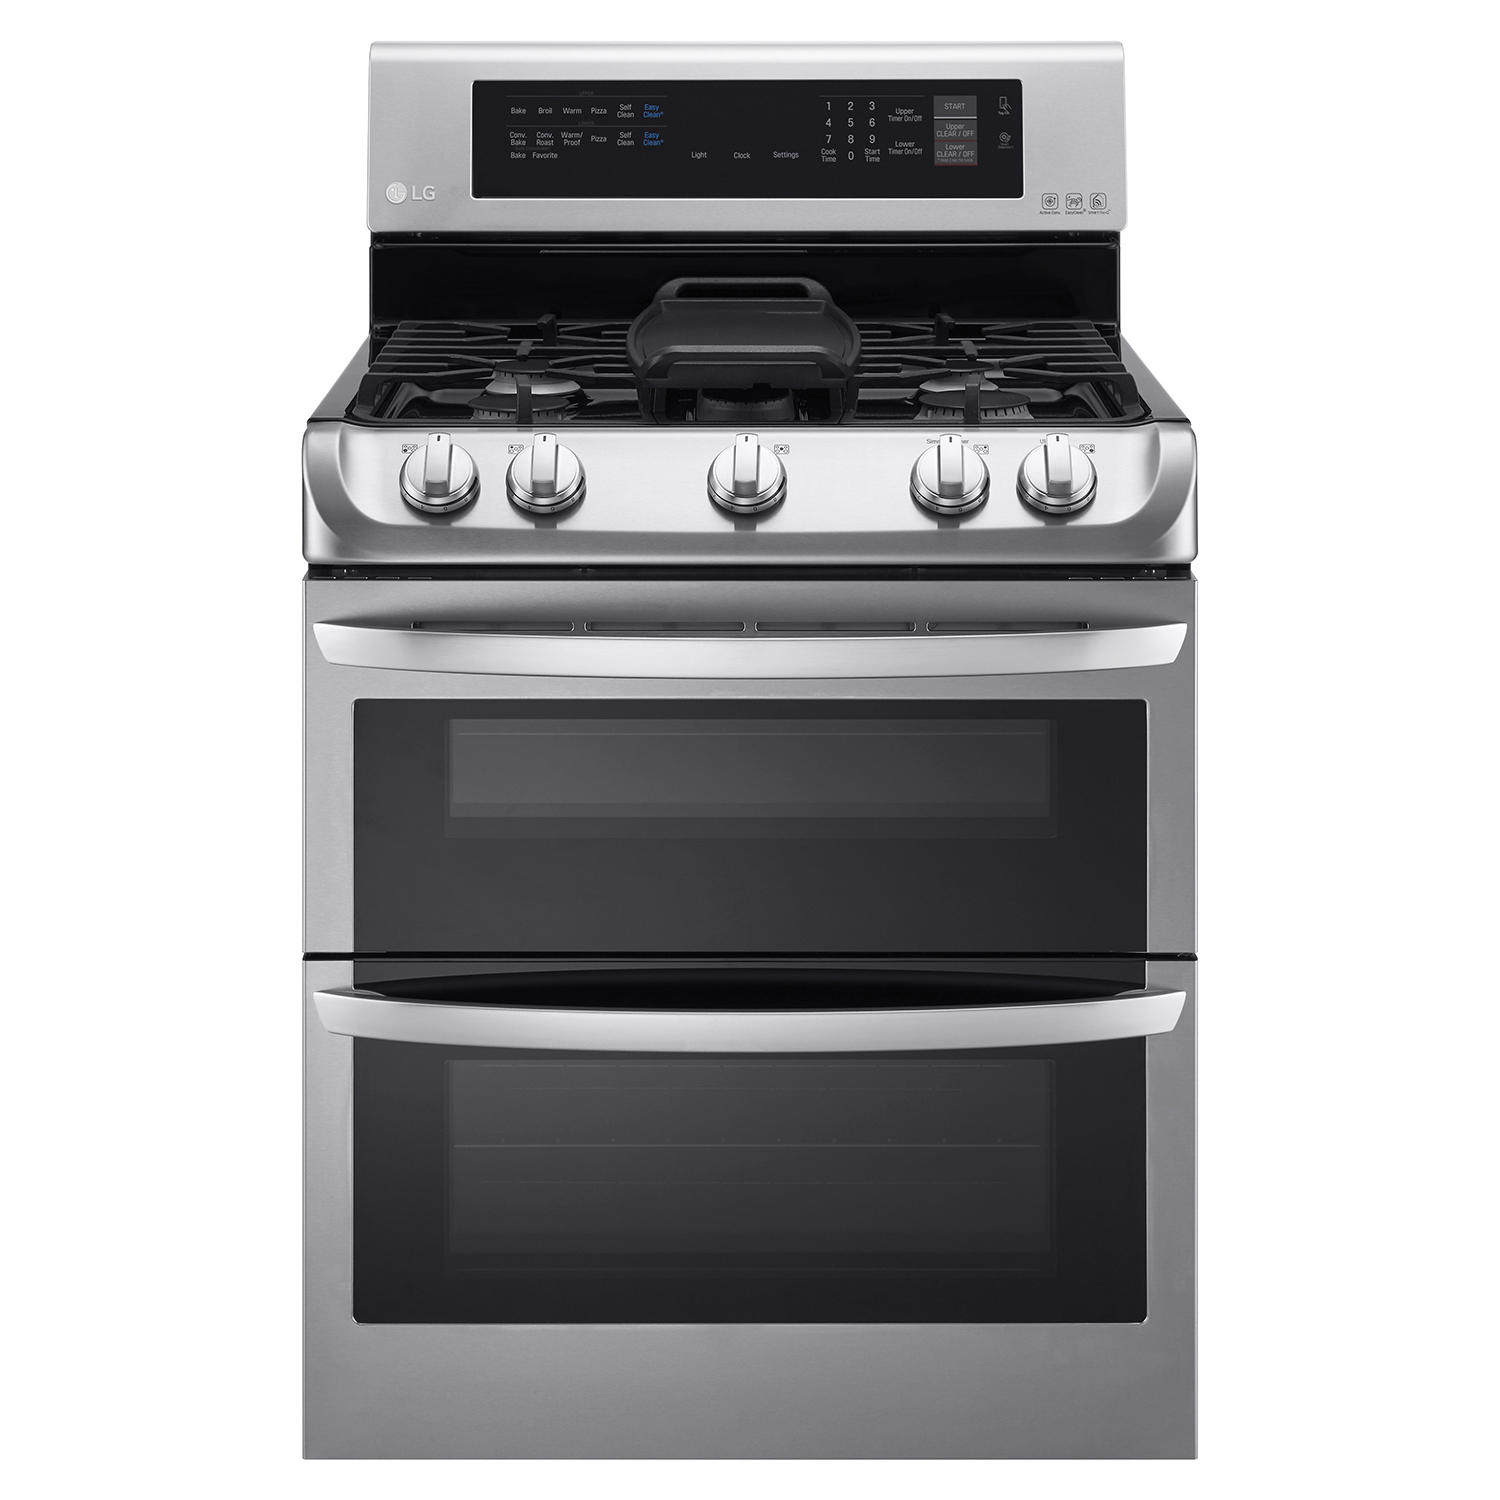 LG LDG4315ST 6.9 cu. ft. Gas Double-Oven Range with ProBake Convection, EasyClean and Gliding Rack in Stainless-Steel